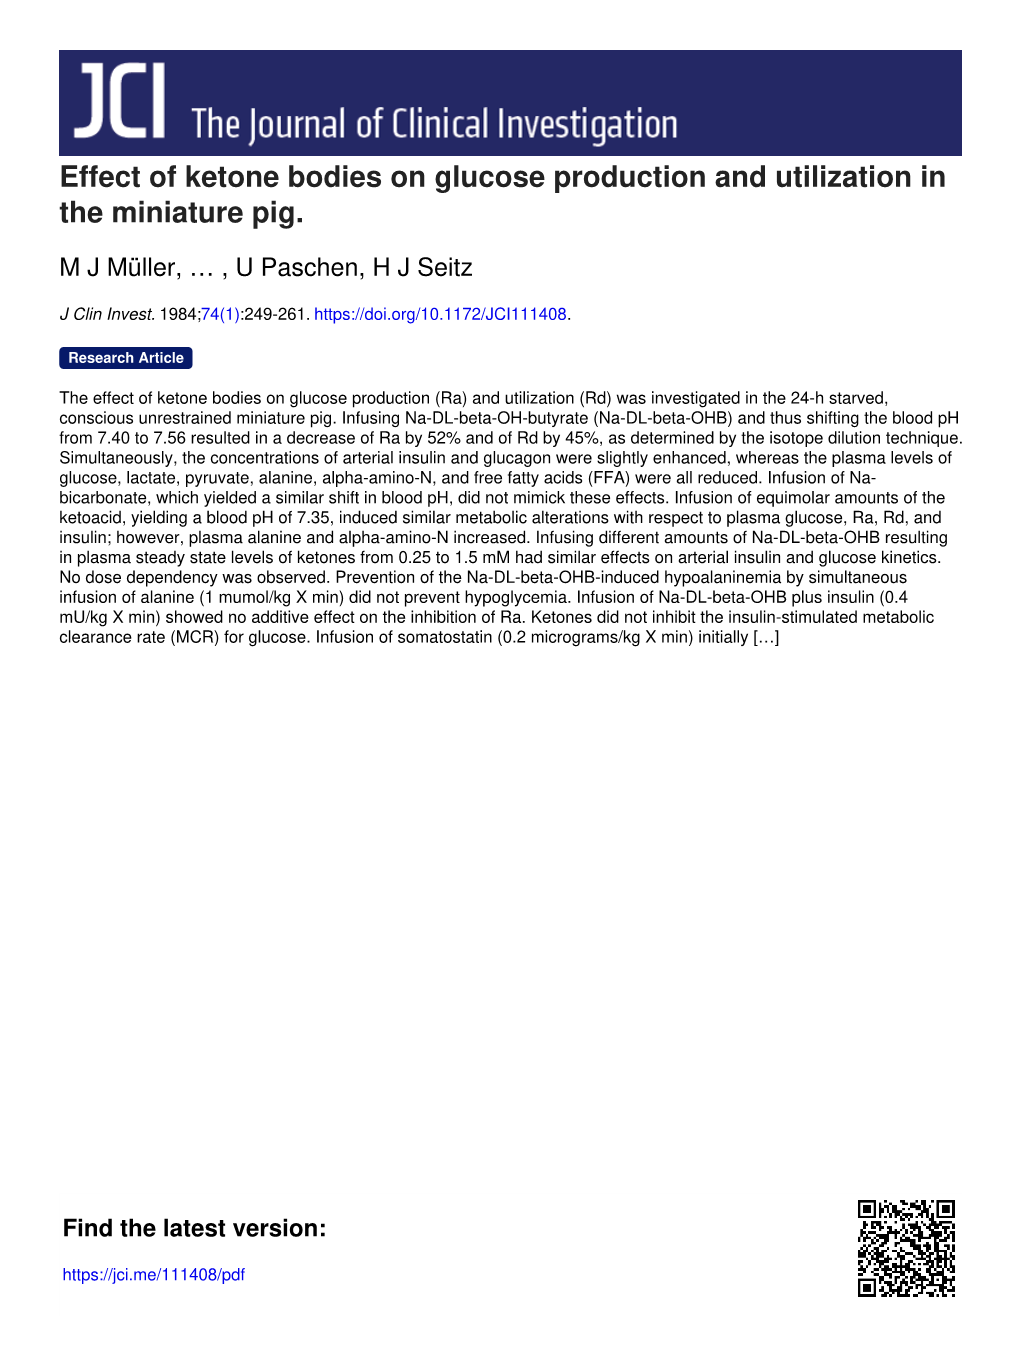 Effect of Ketone Bodies on Glucose Production and Utilization in the Miniature Pig